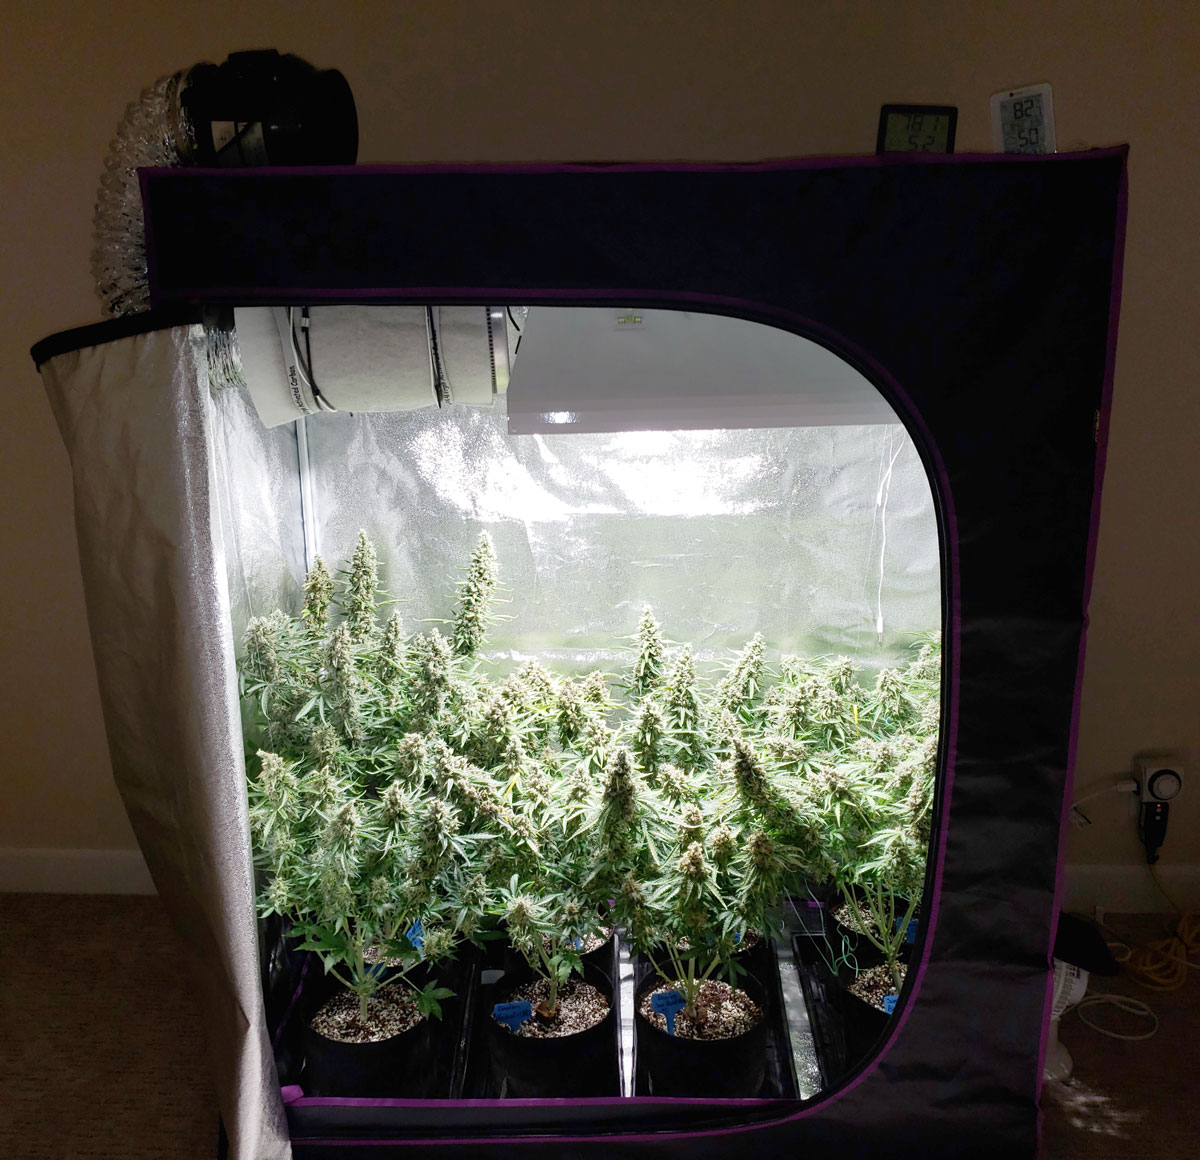 Get everything you need to grow too much weed!